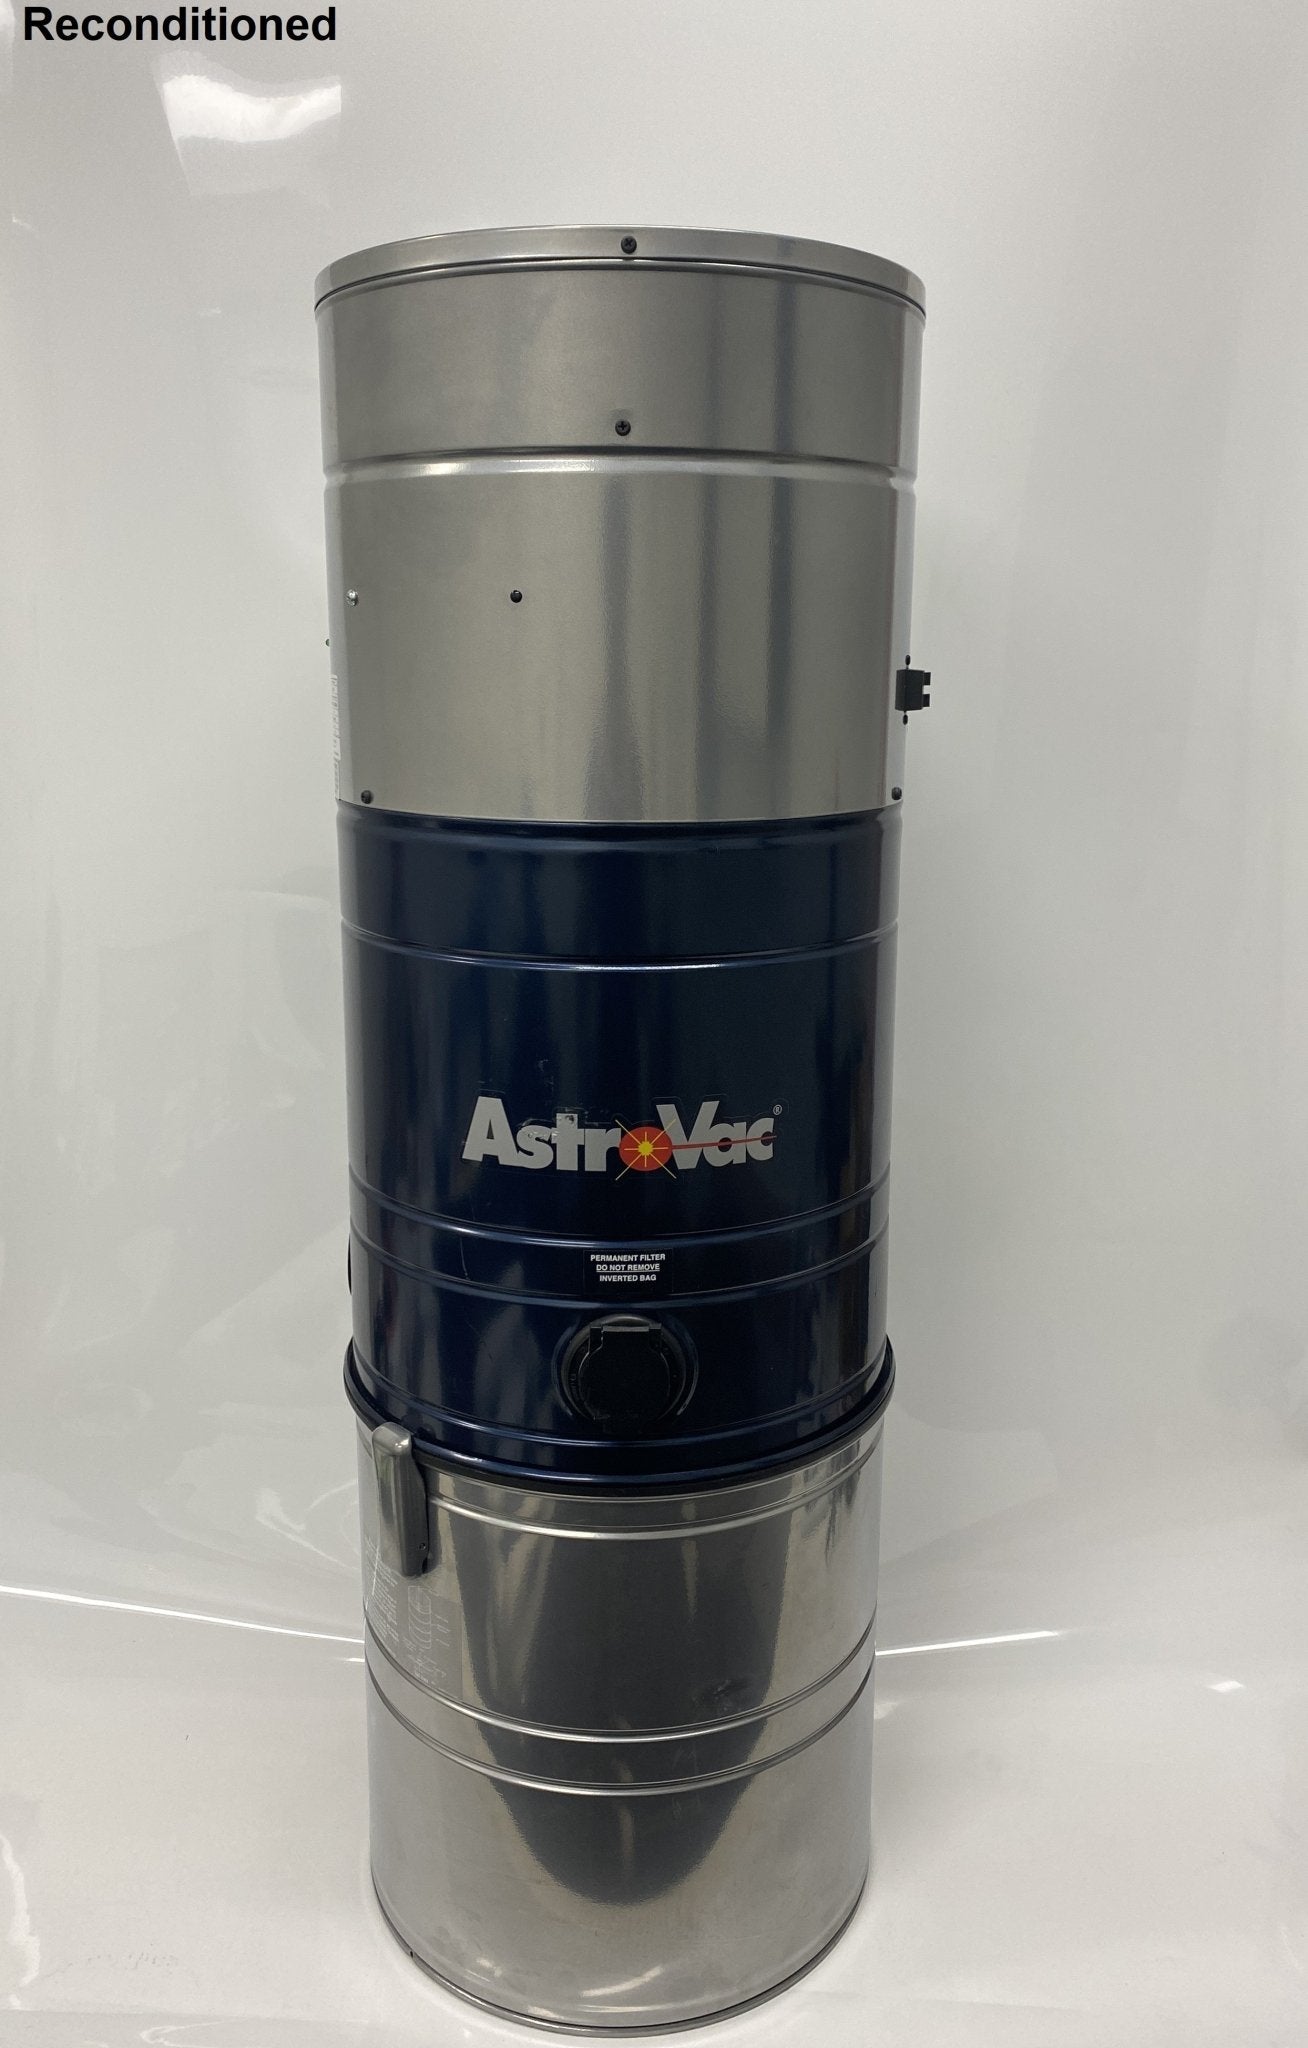 Improved Cleaning Experience with ASTROVAC SR54 Central Vacuum System and Upgraded Kit